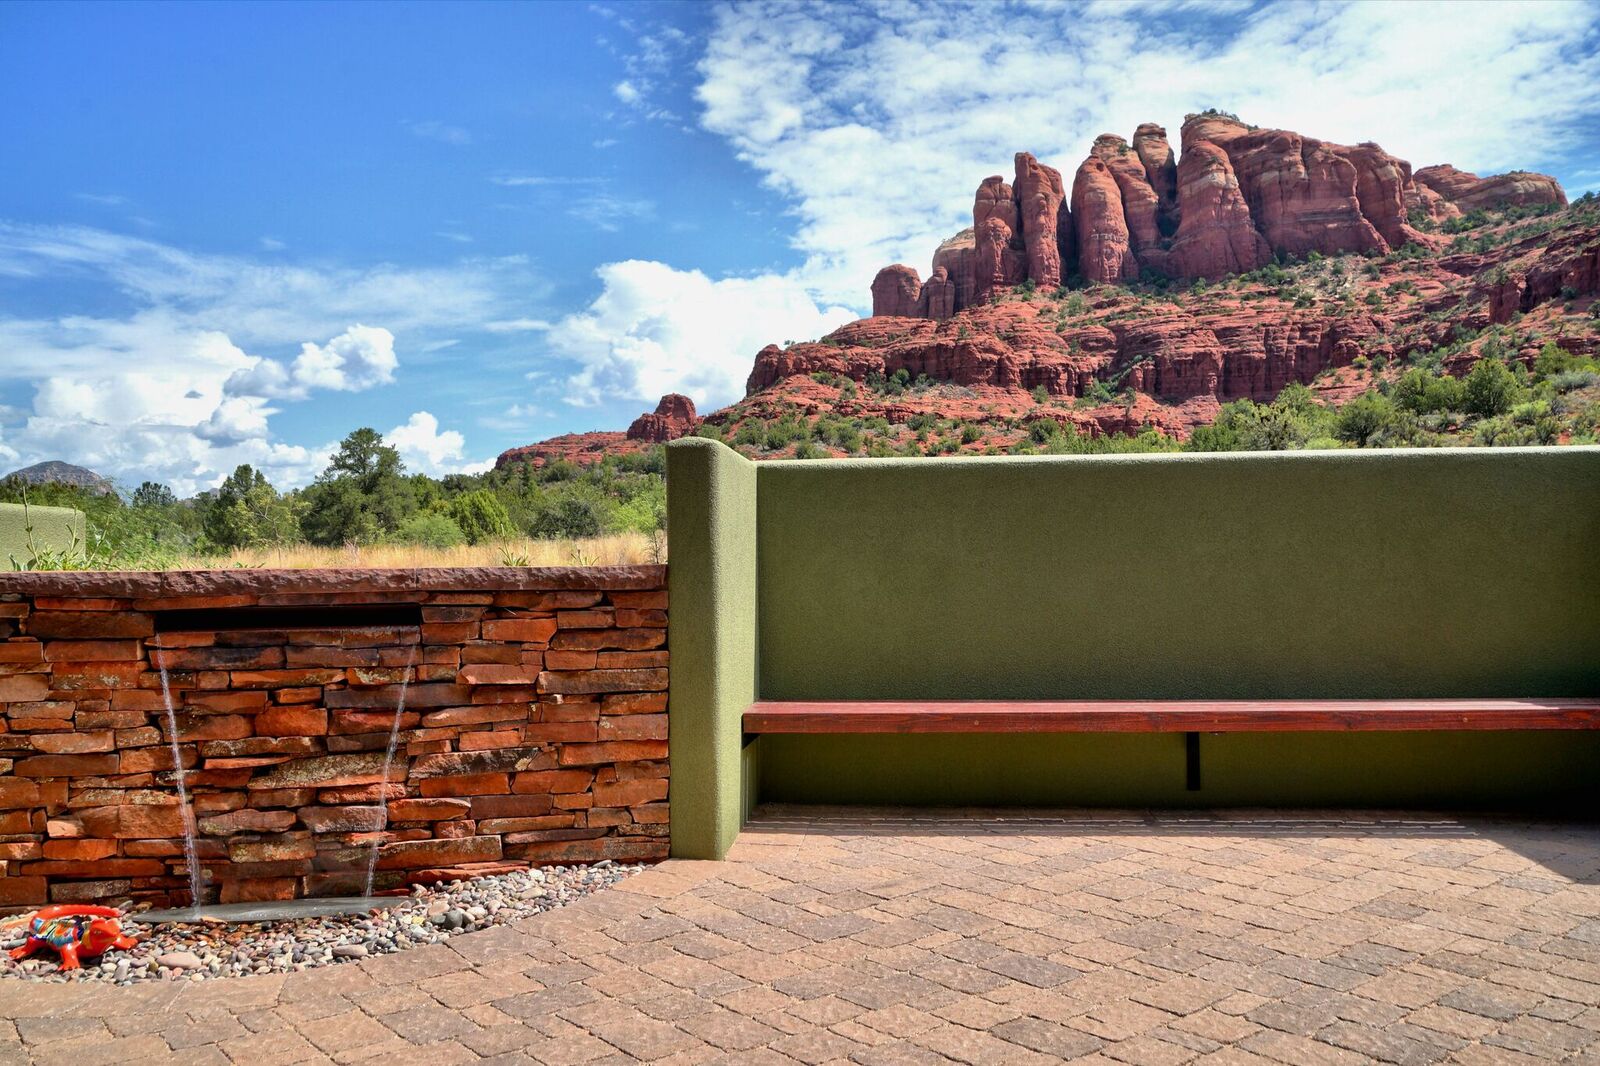 A bench sitting in front of a rock wall.